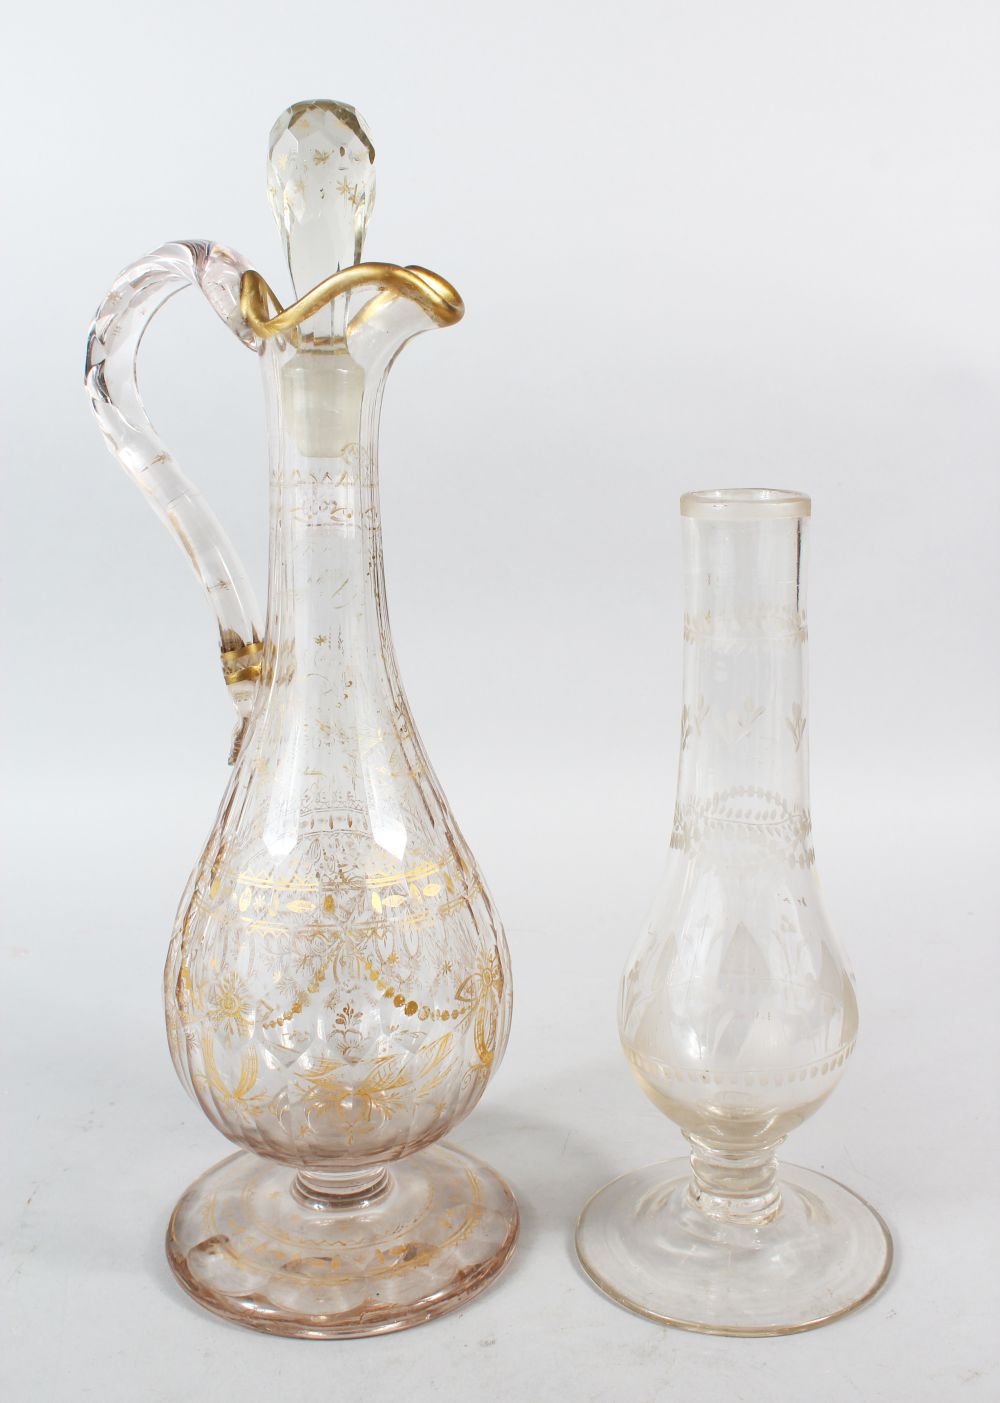 A SUPERB GILT DECORATED CUT GLASS EWER AND STOPPER, 41cm high, together with a cut glass pedestal